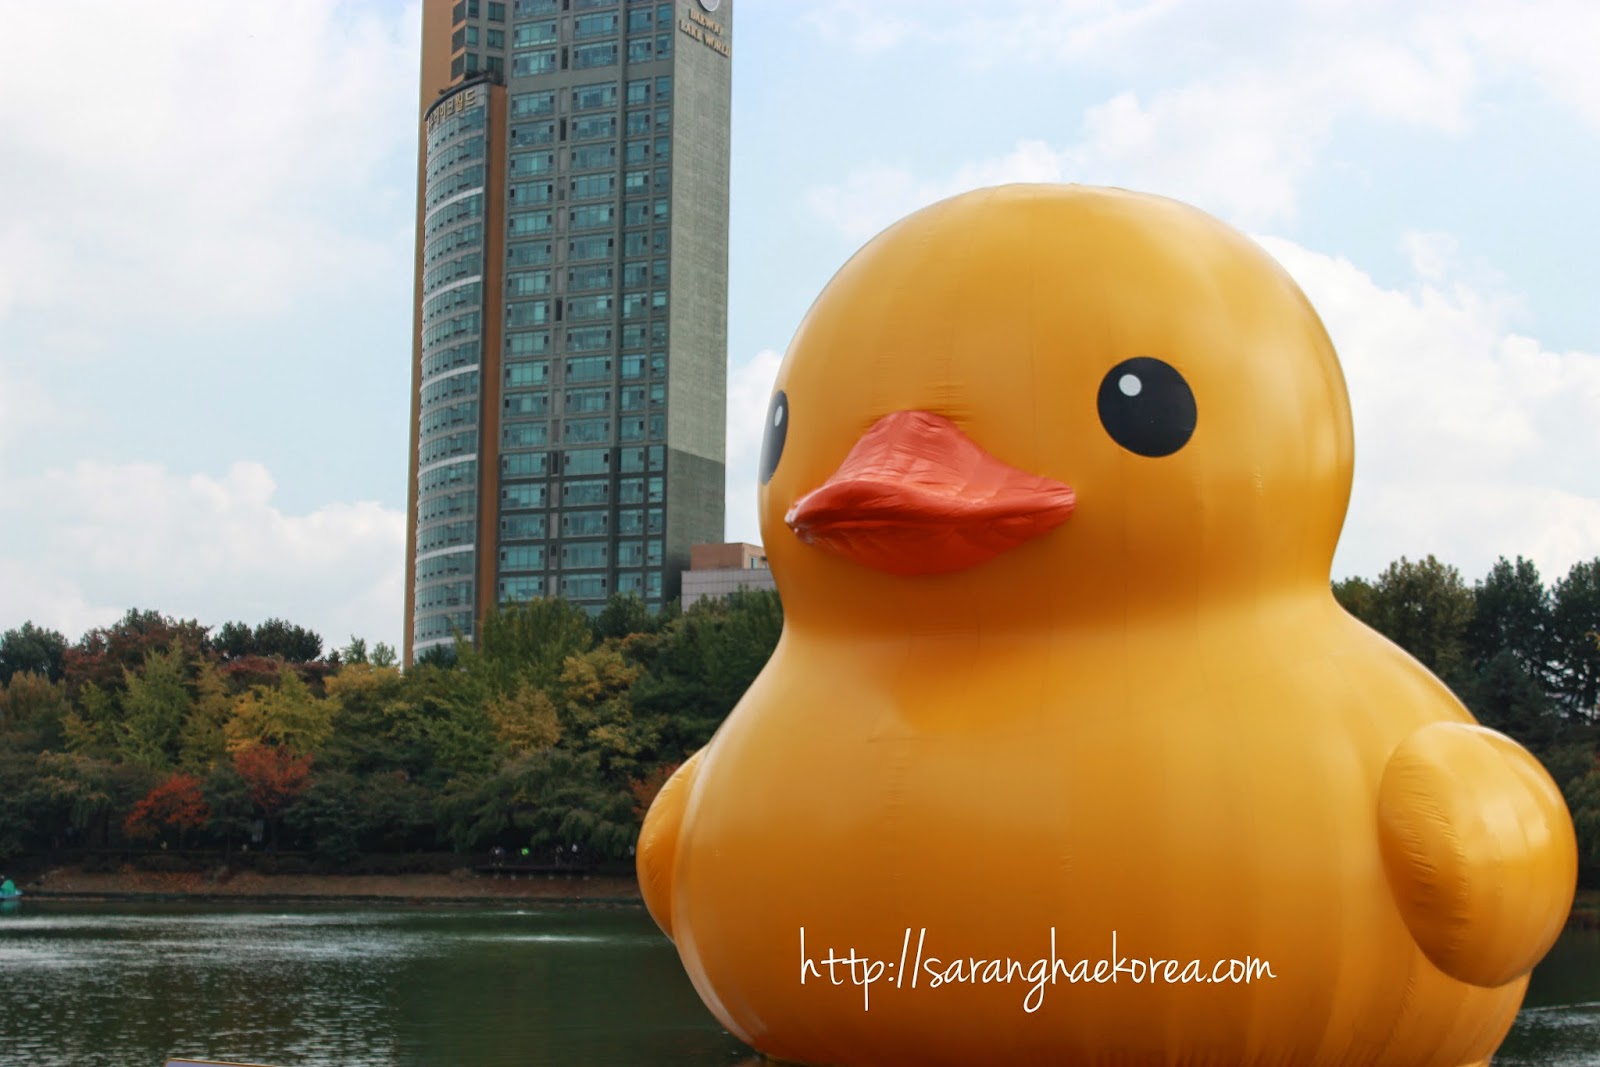 The Rubber Duck Project in Korea